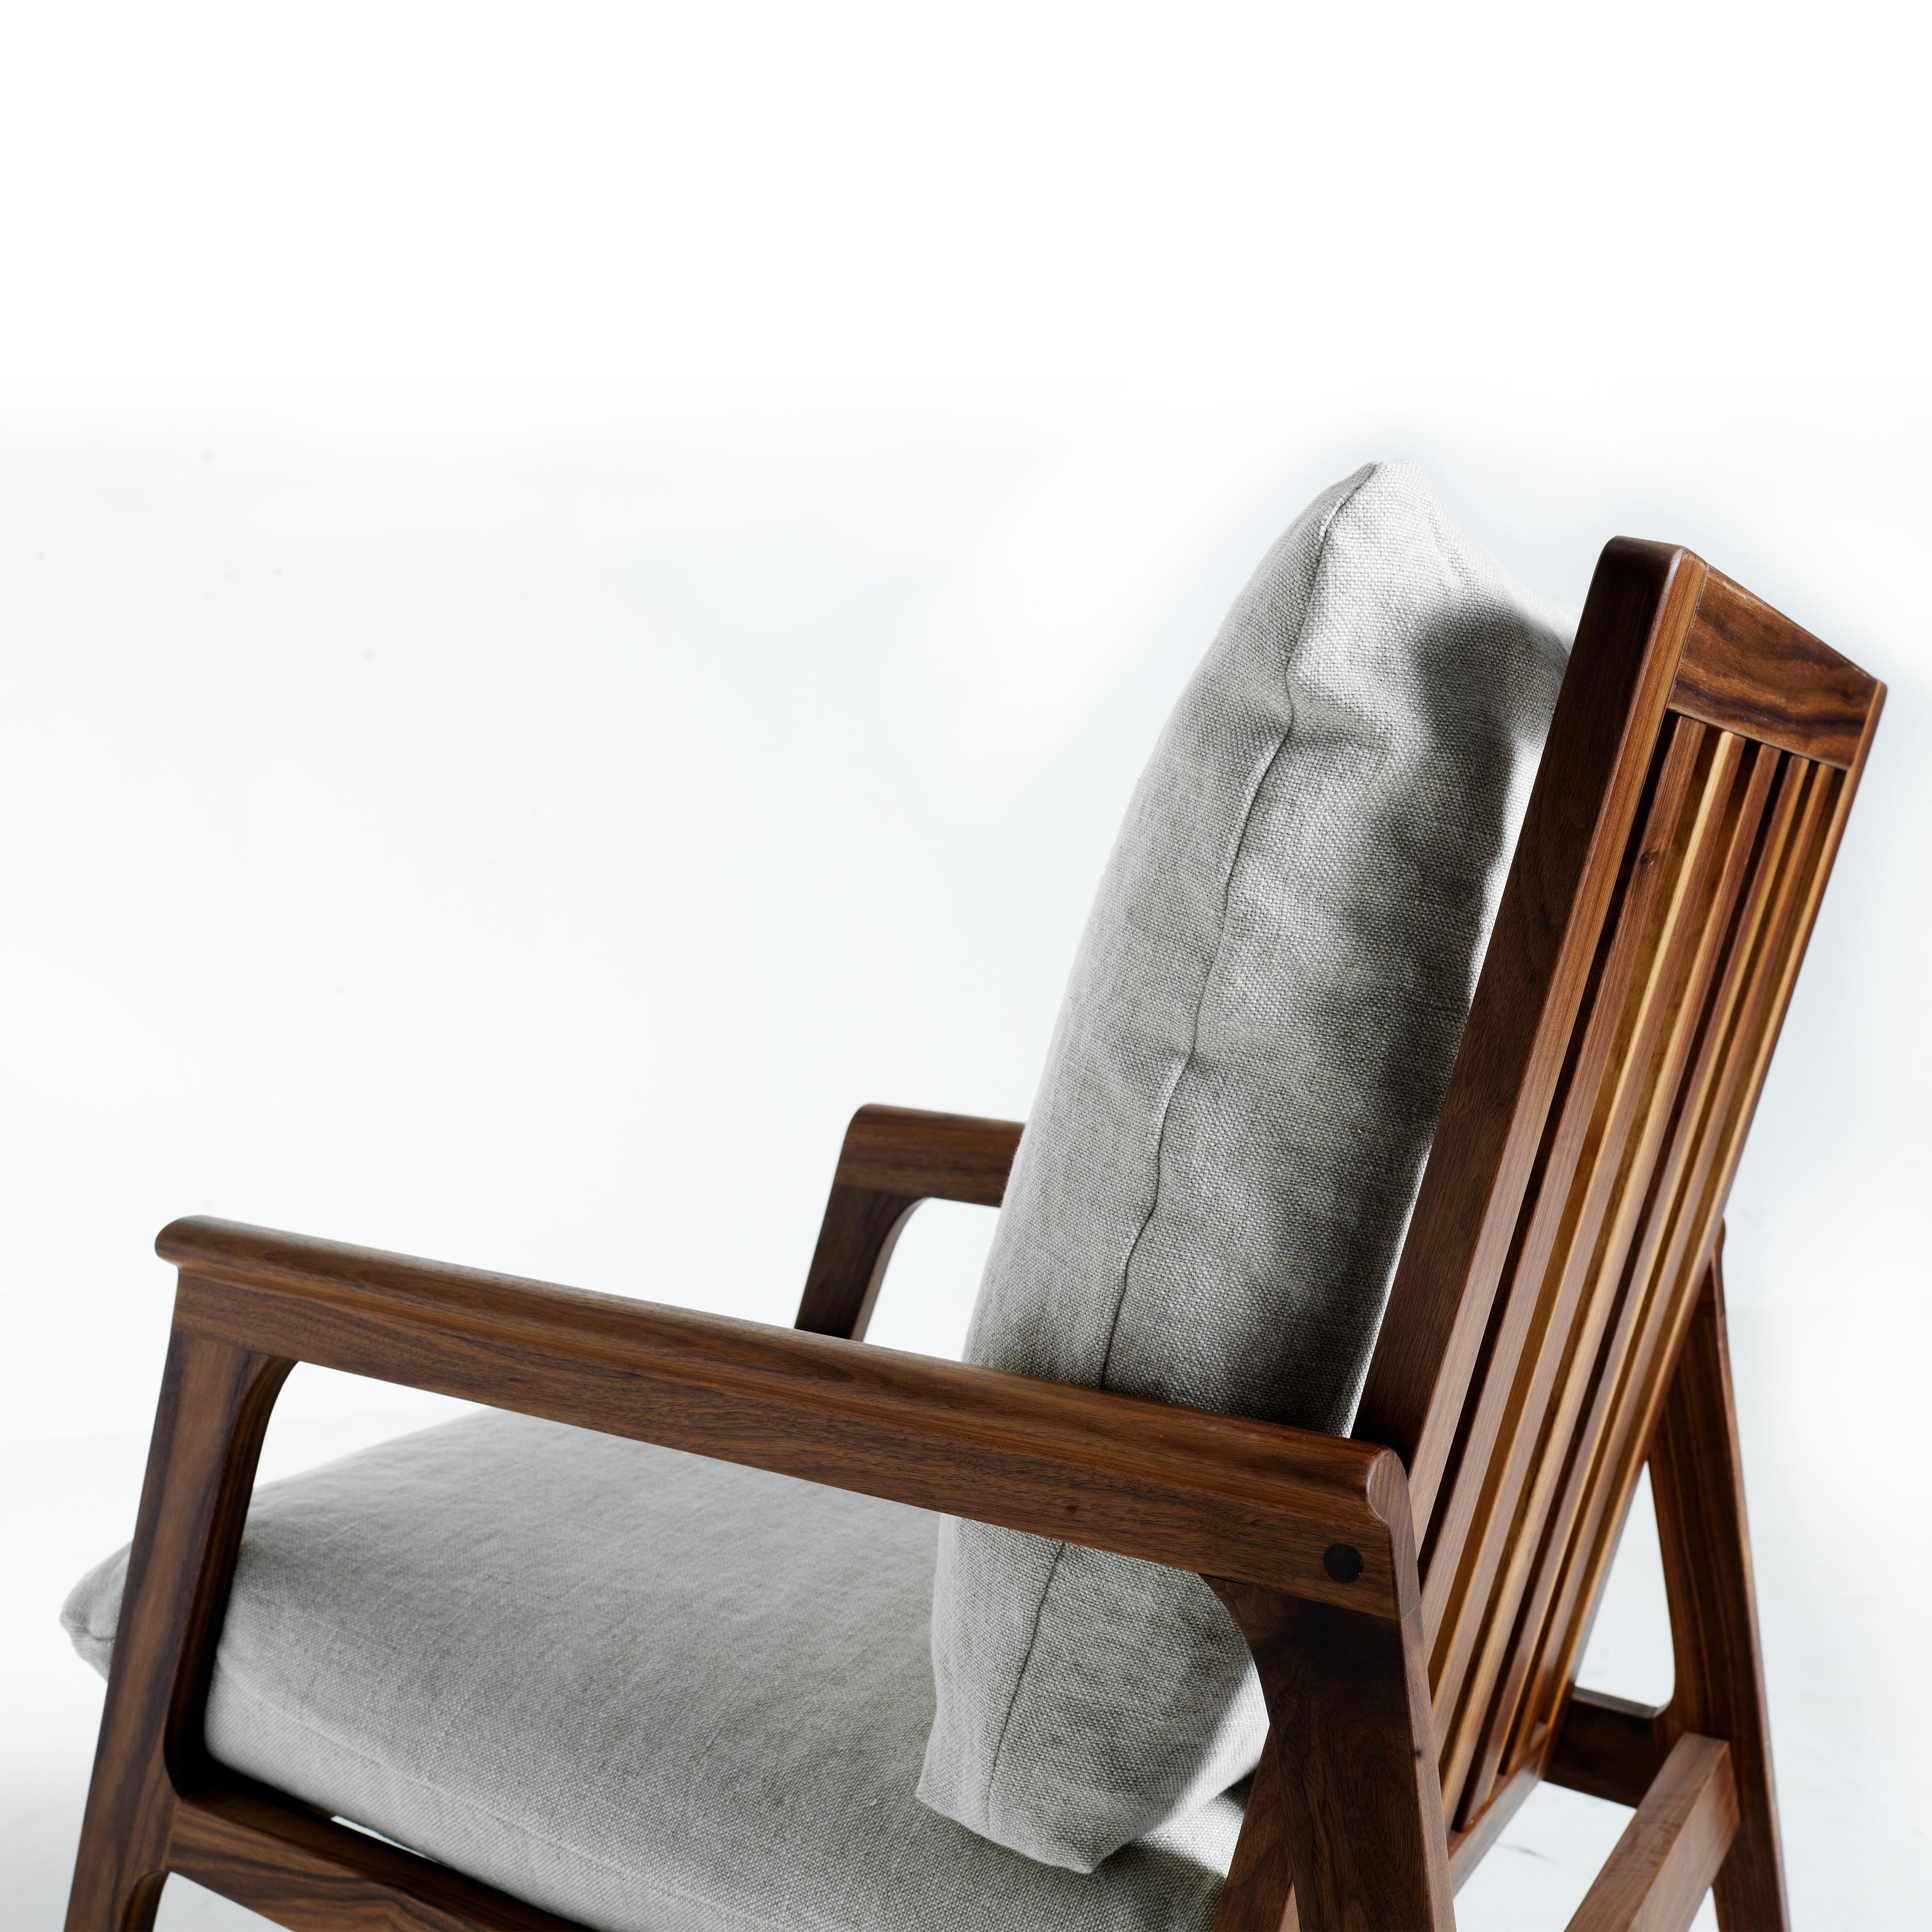 Leather Momento Solid Wood Armchair, Walnut in Hand-Made Natural Finish, Contemporary For Sale